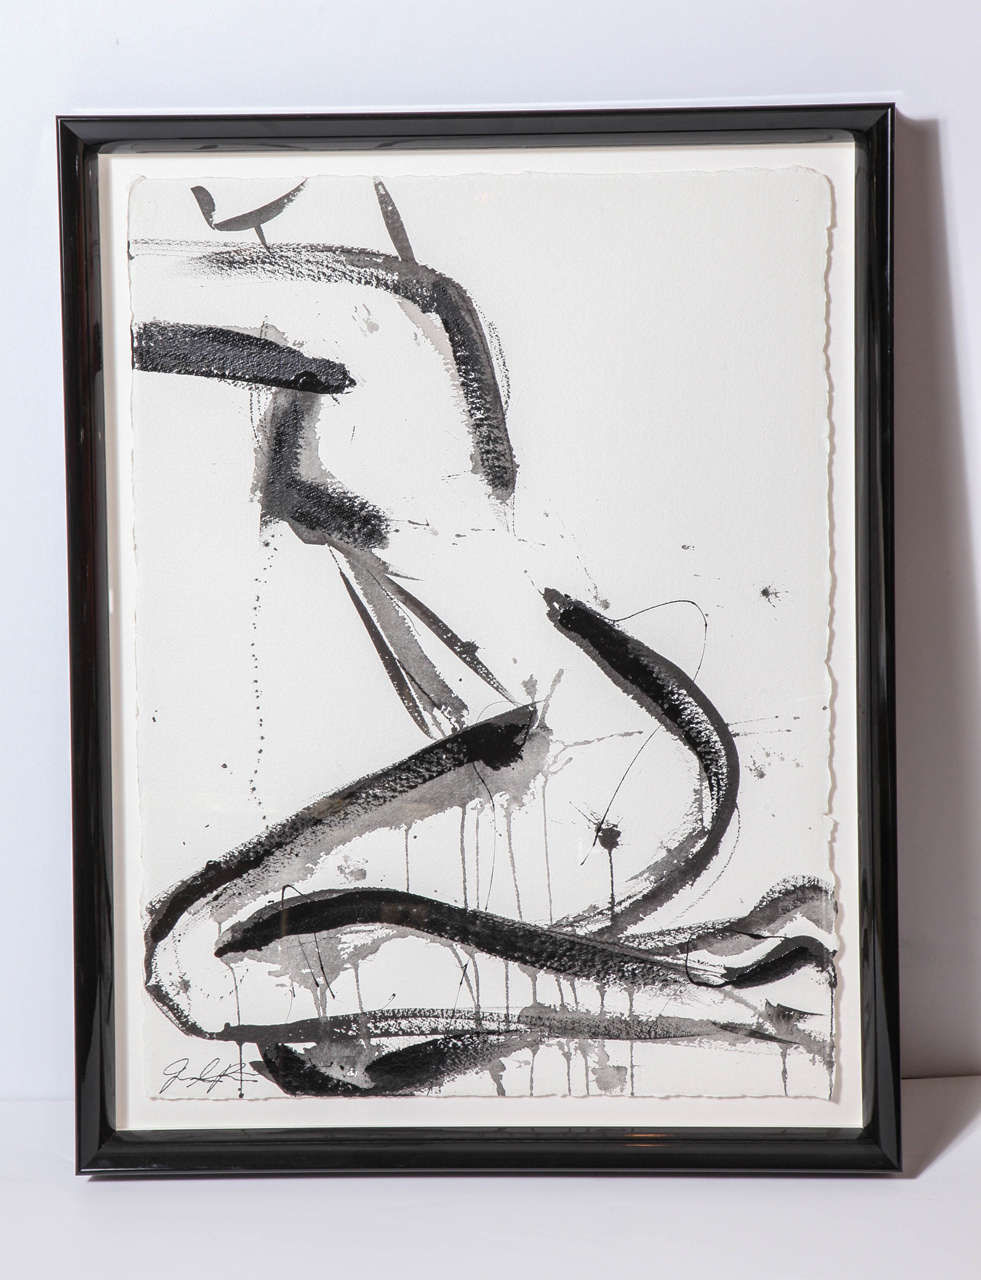 Nude painting by Jenna Snyder-Phillips. 
Sumi ink, charcoal and lacquer on 100% archive paper. Beautifully framed with a black lacquer frame.